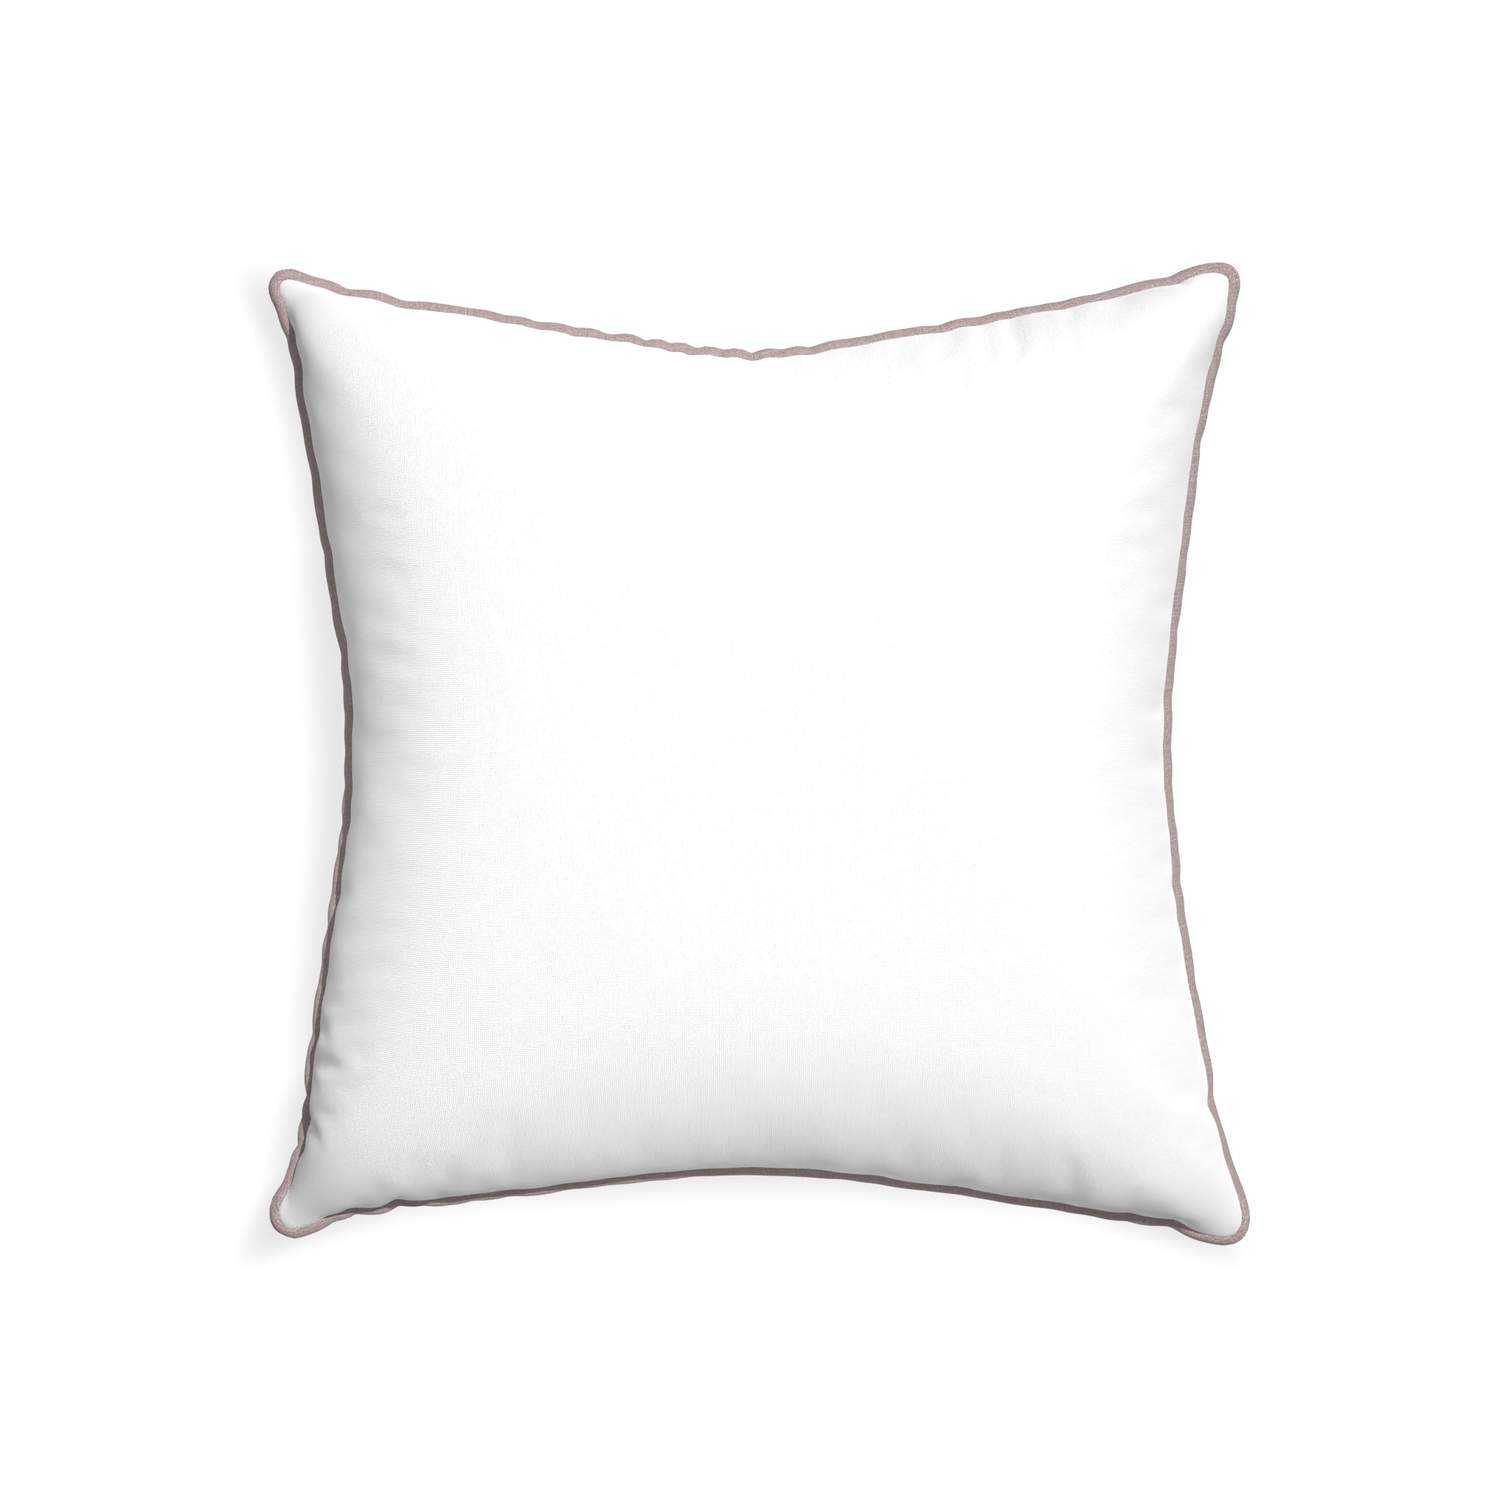 22-square snow custom white cottonpillow with orchid piping on white background